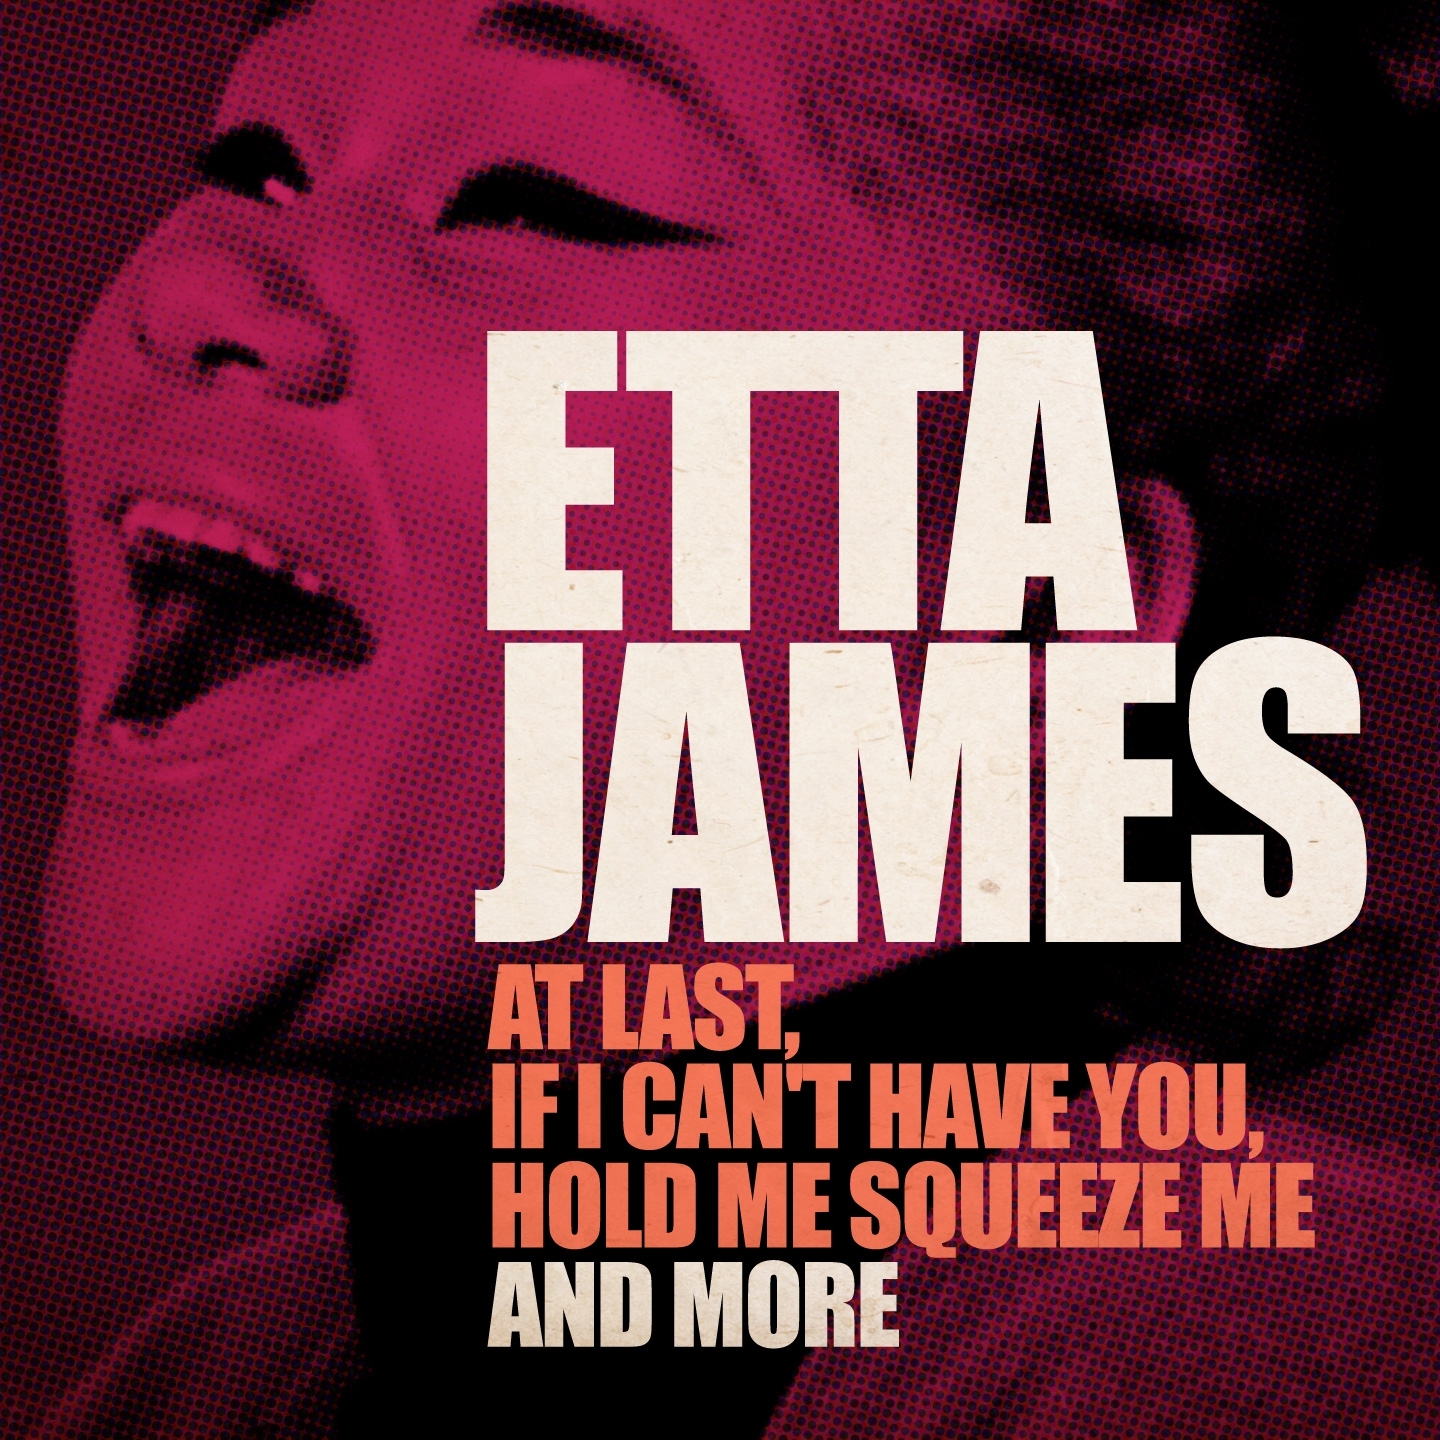 Etta James (At Last, If I Can't Have You, Hold Me Squeeze Me and More - Remastered Version)